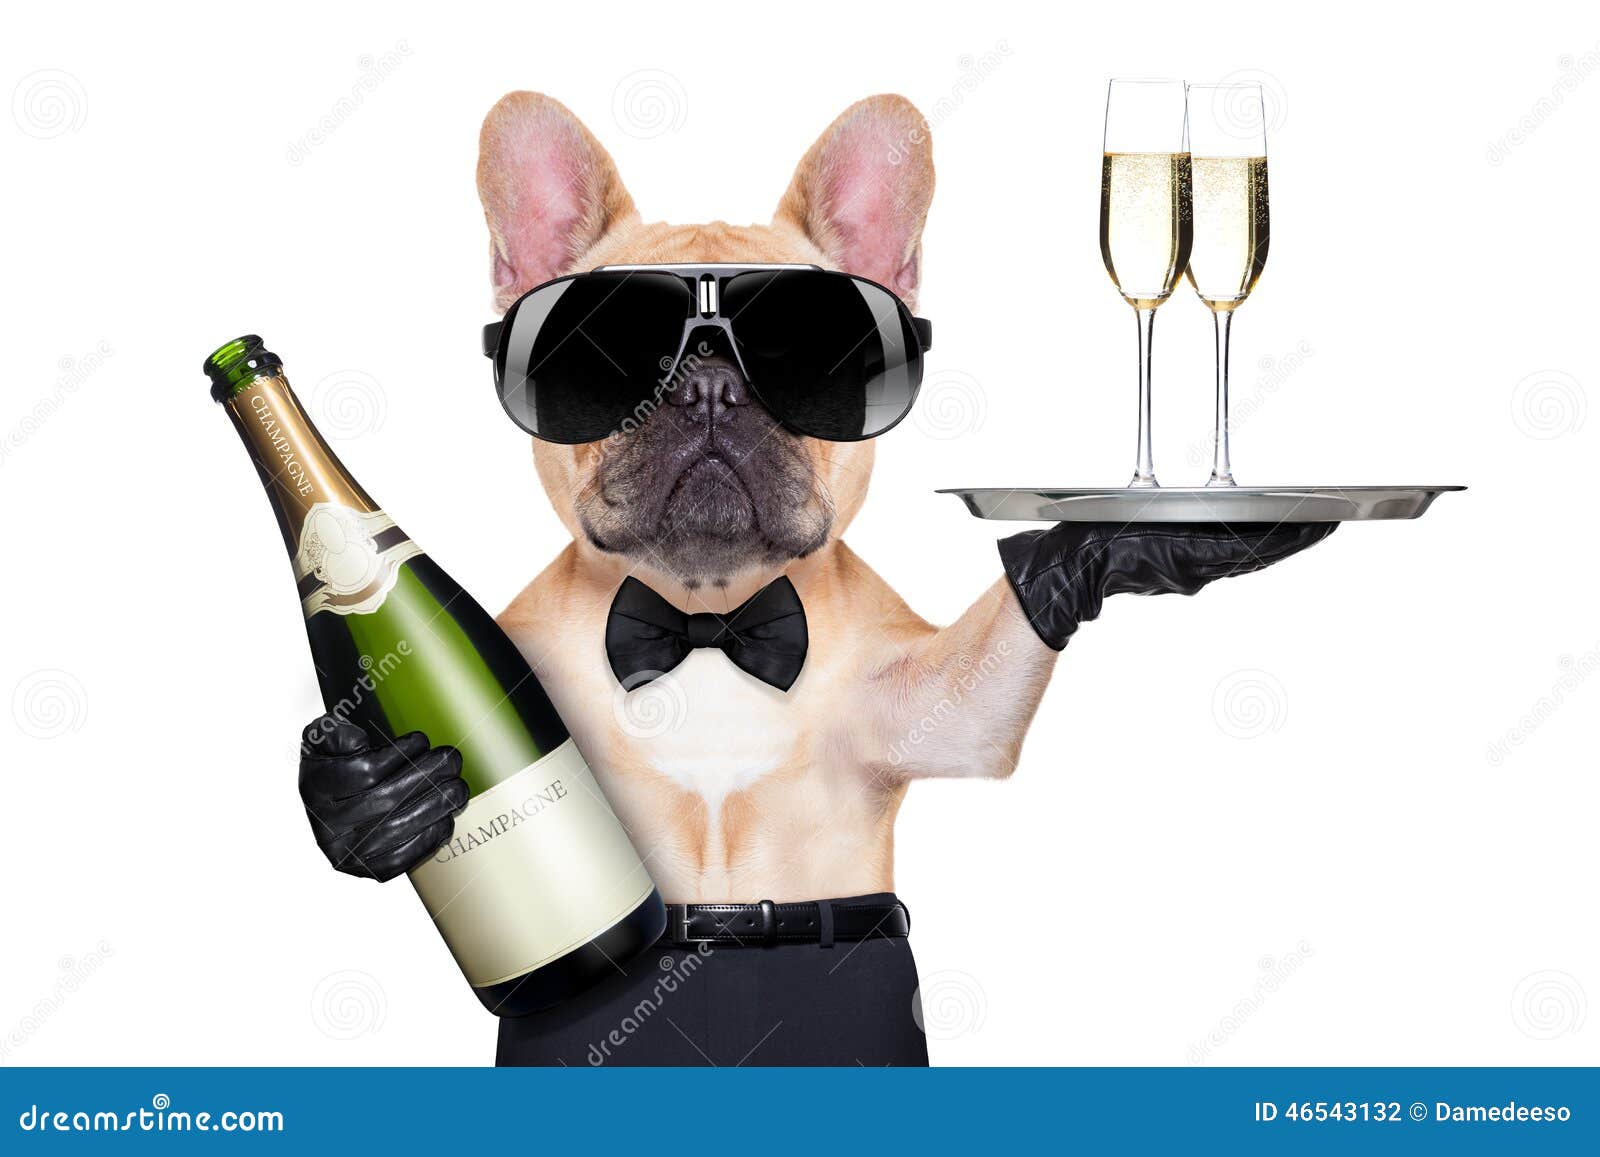 Cool Party Dog Stock Photo - Image: 46543132